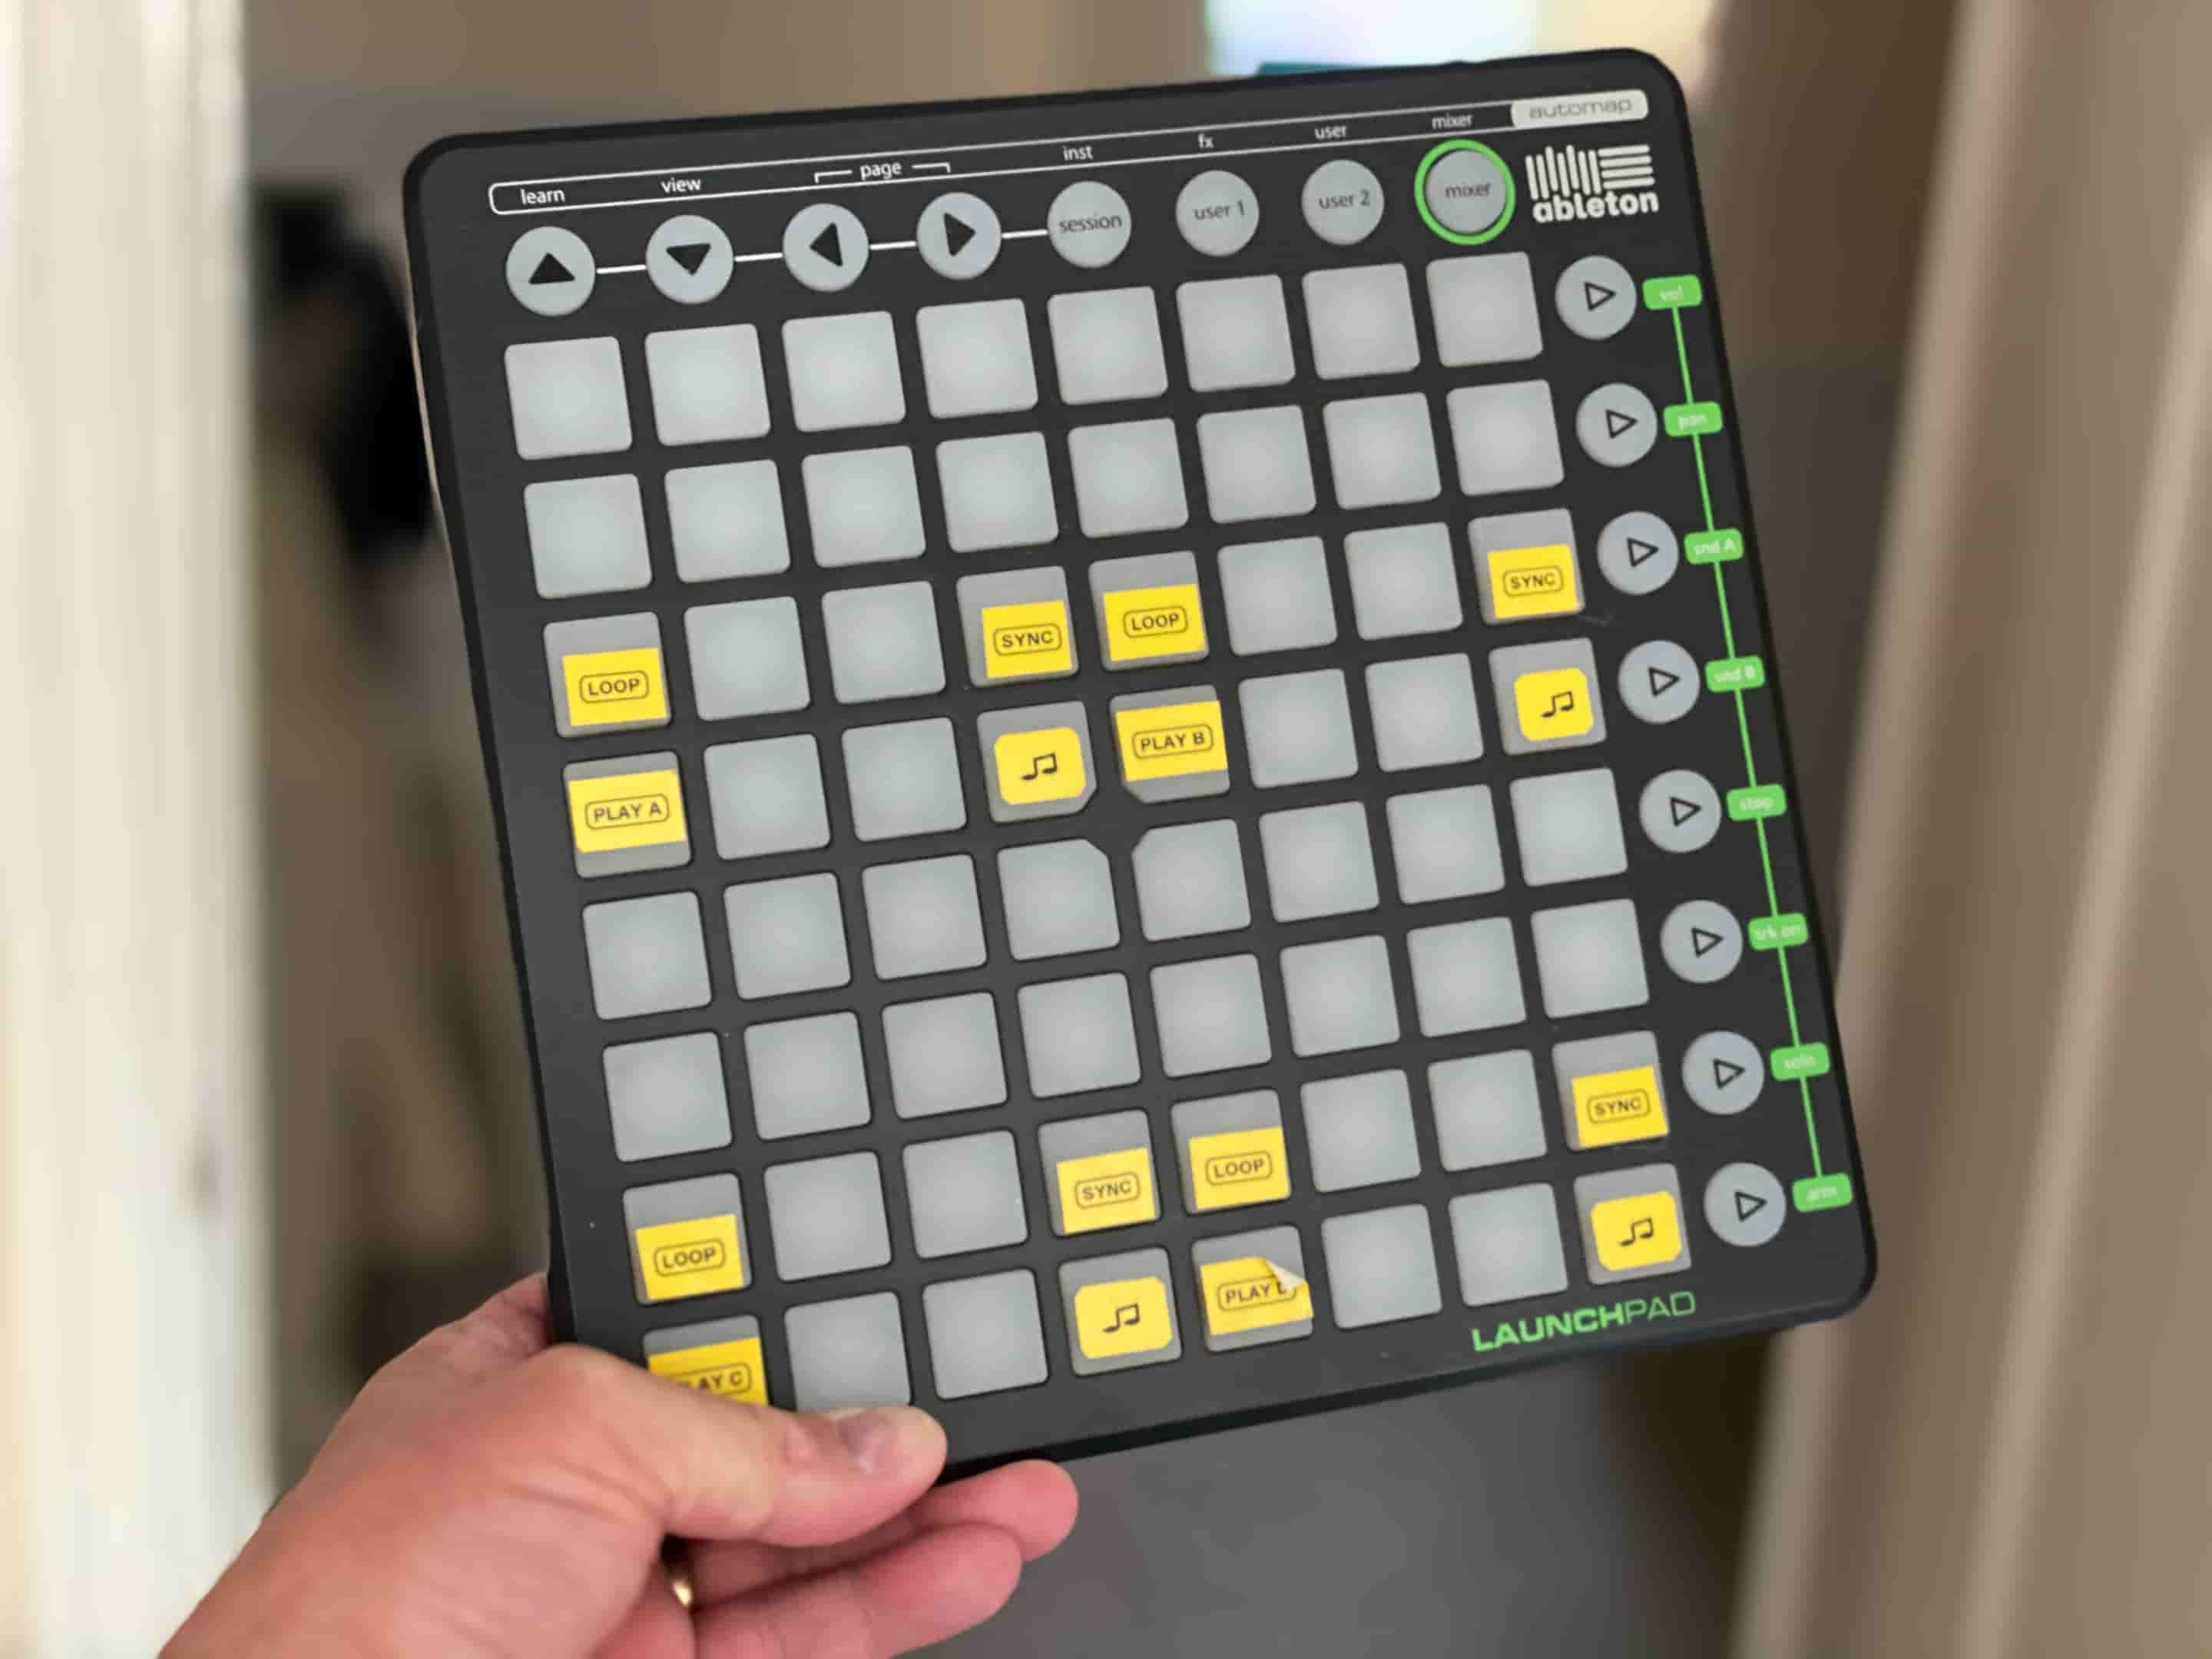 An Ableton LaunchPad MIDI controller - an 80-button controller that could be used to control all manner of events through Keyboard Maestro or similar apps